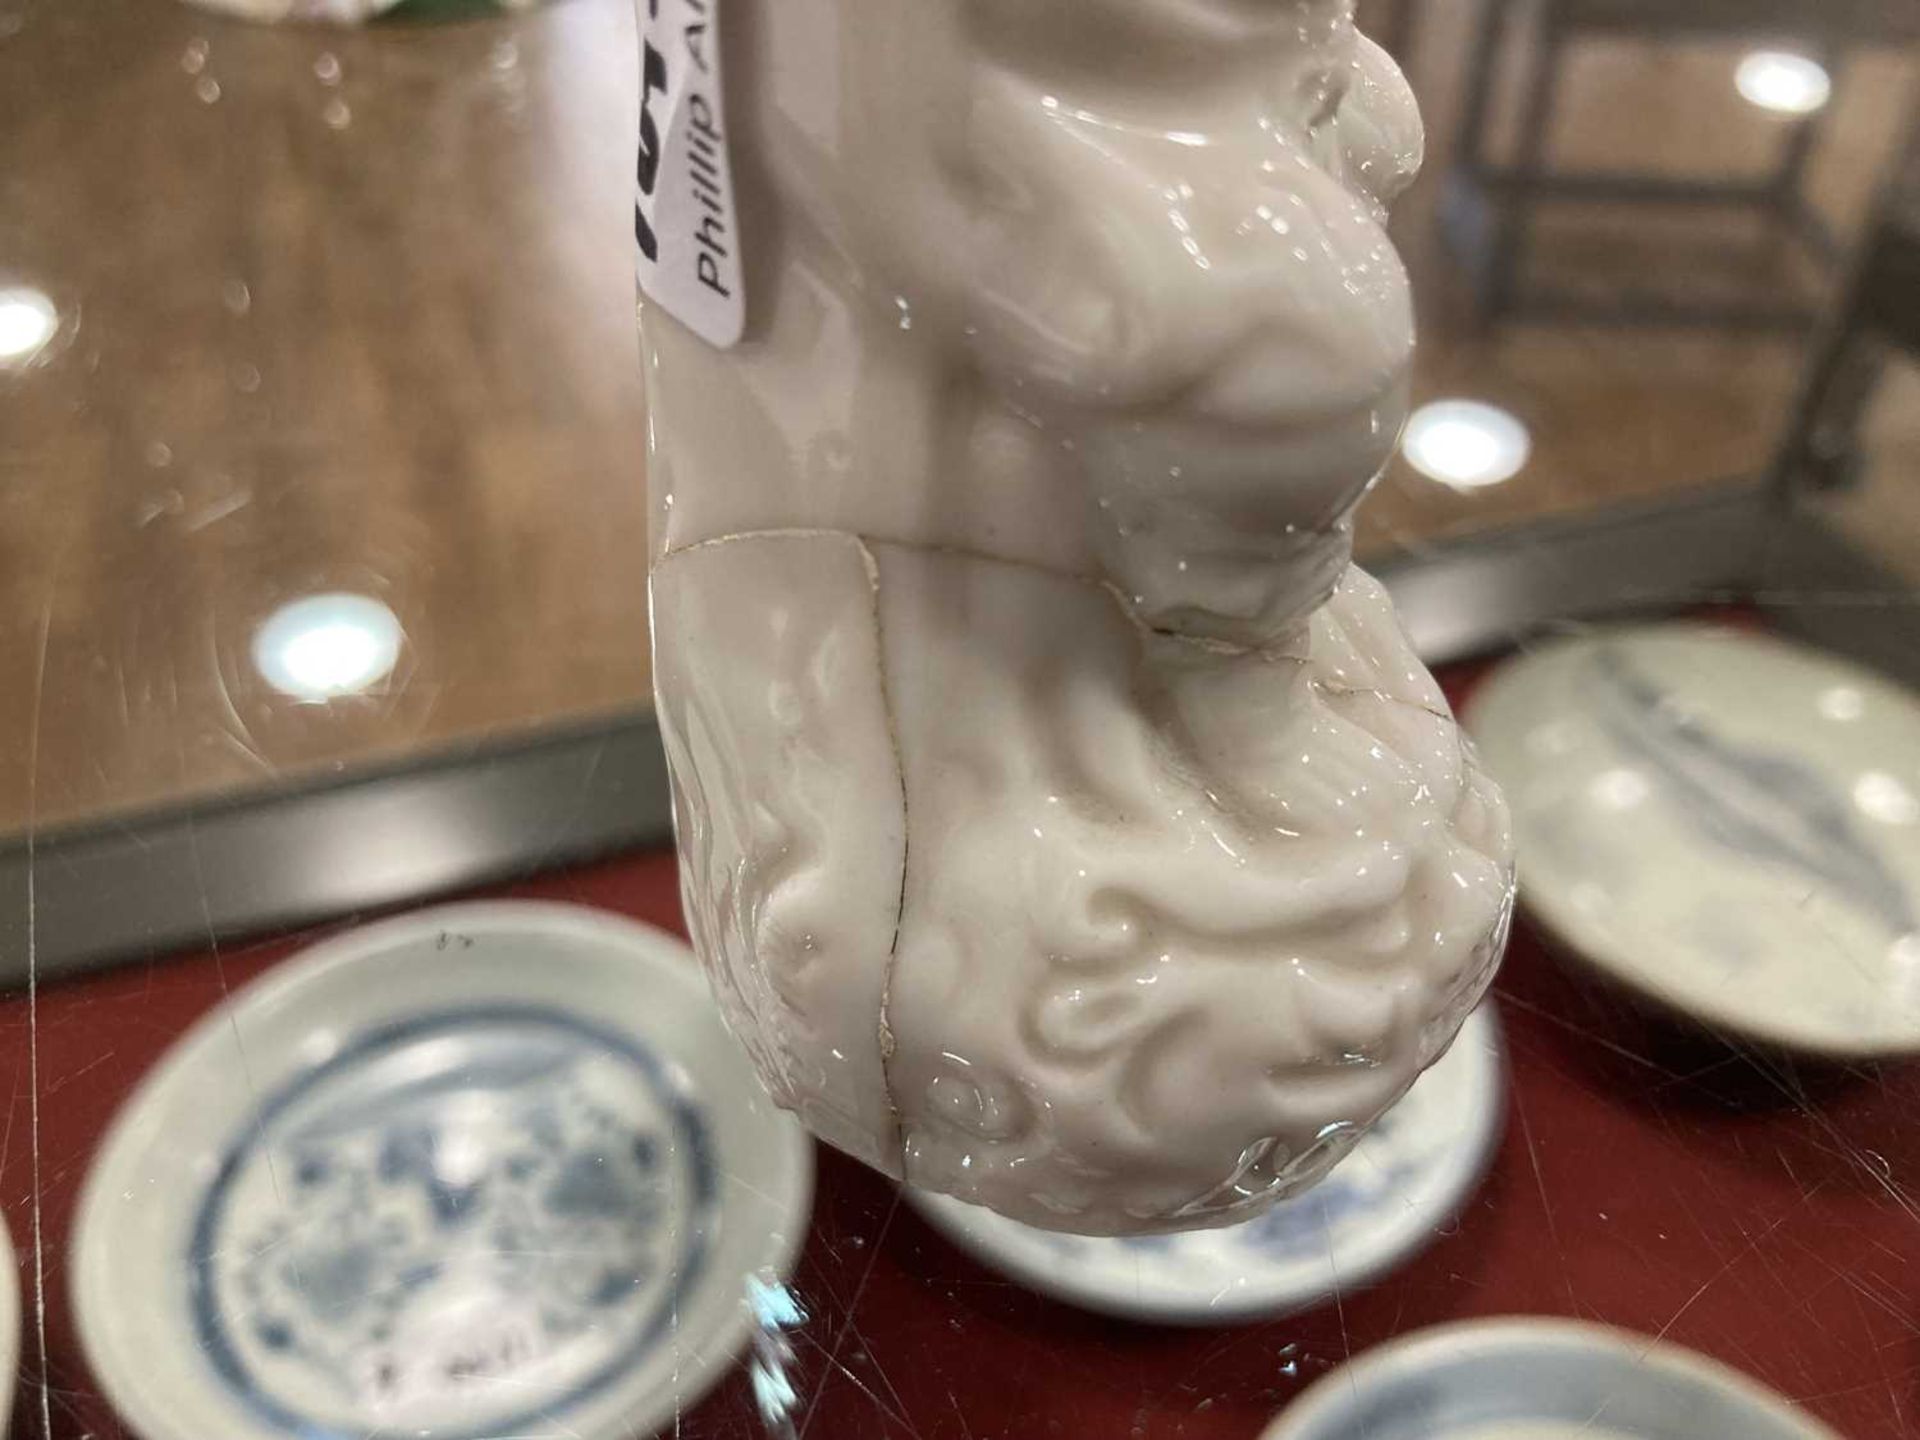 A Chinese blanc de chine figure, possibly Dong Fangshuo, holding a walking stick on a swirl design - Bild 20 aus 22